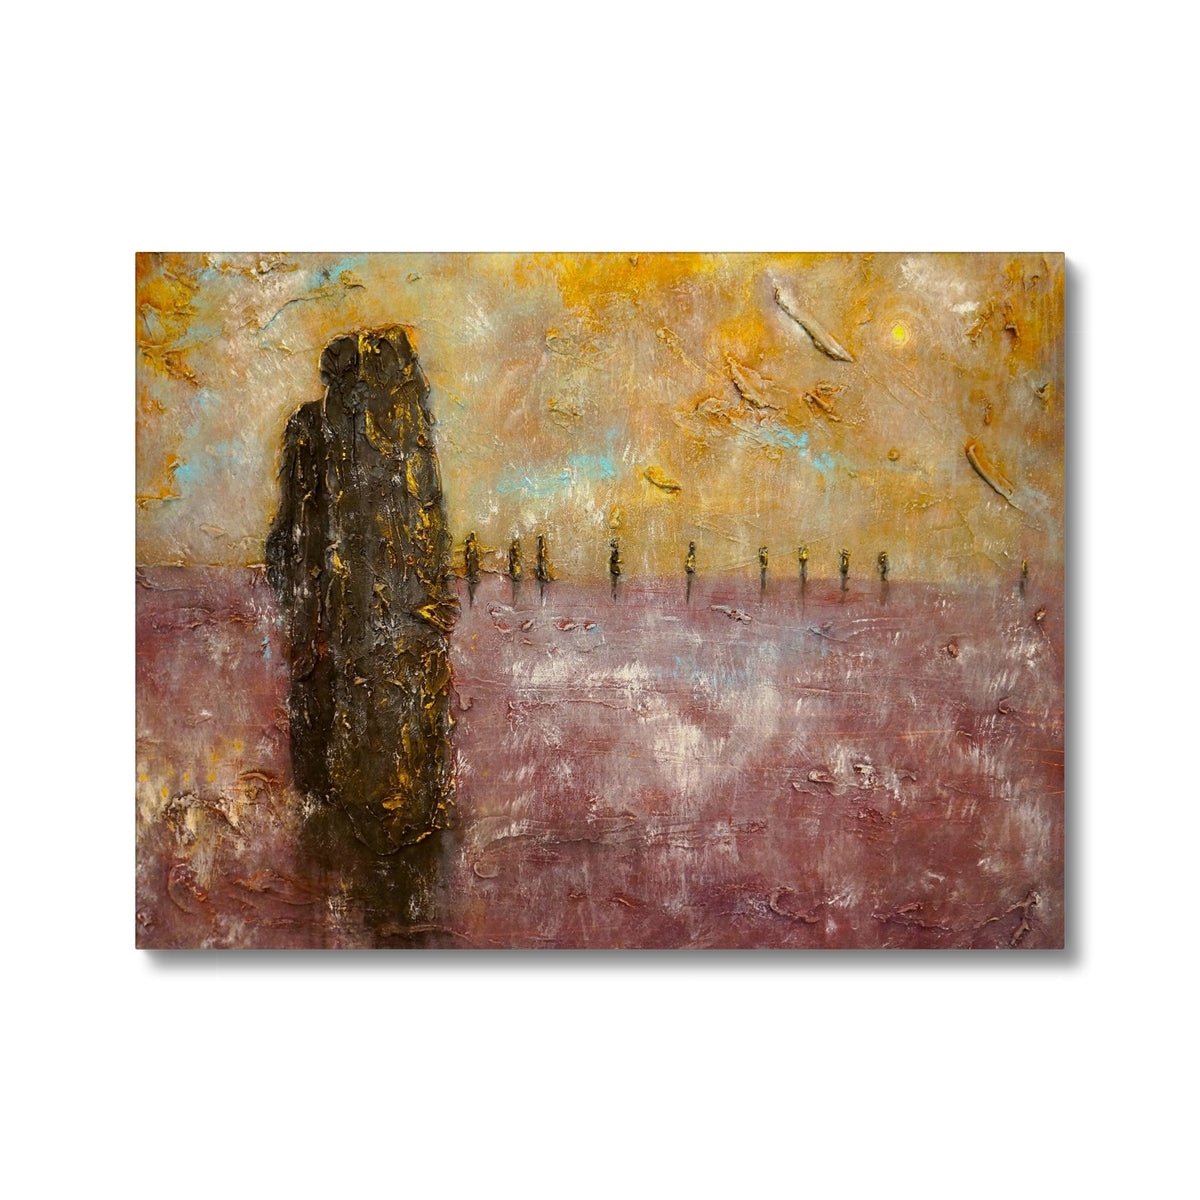 Brodgar Mist Orkney Painting | Canvas From Scotland-Contemporary Stretched Canvas Prints-Orkney Art Gallery-24"x18"-Paintings, Prints, Homeware, Art Gifts From Scotland By Scottish Artist Kevin Hunter